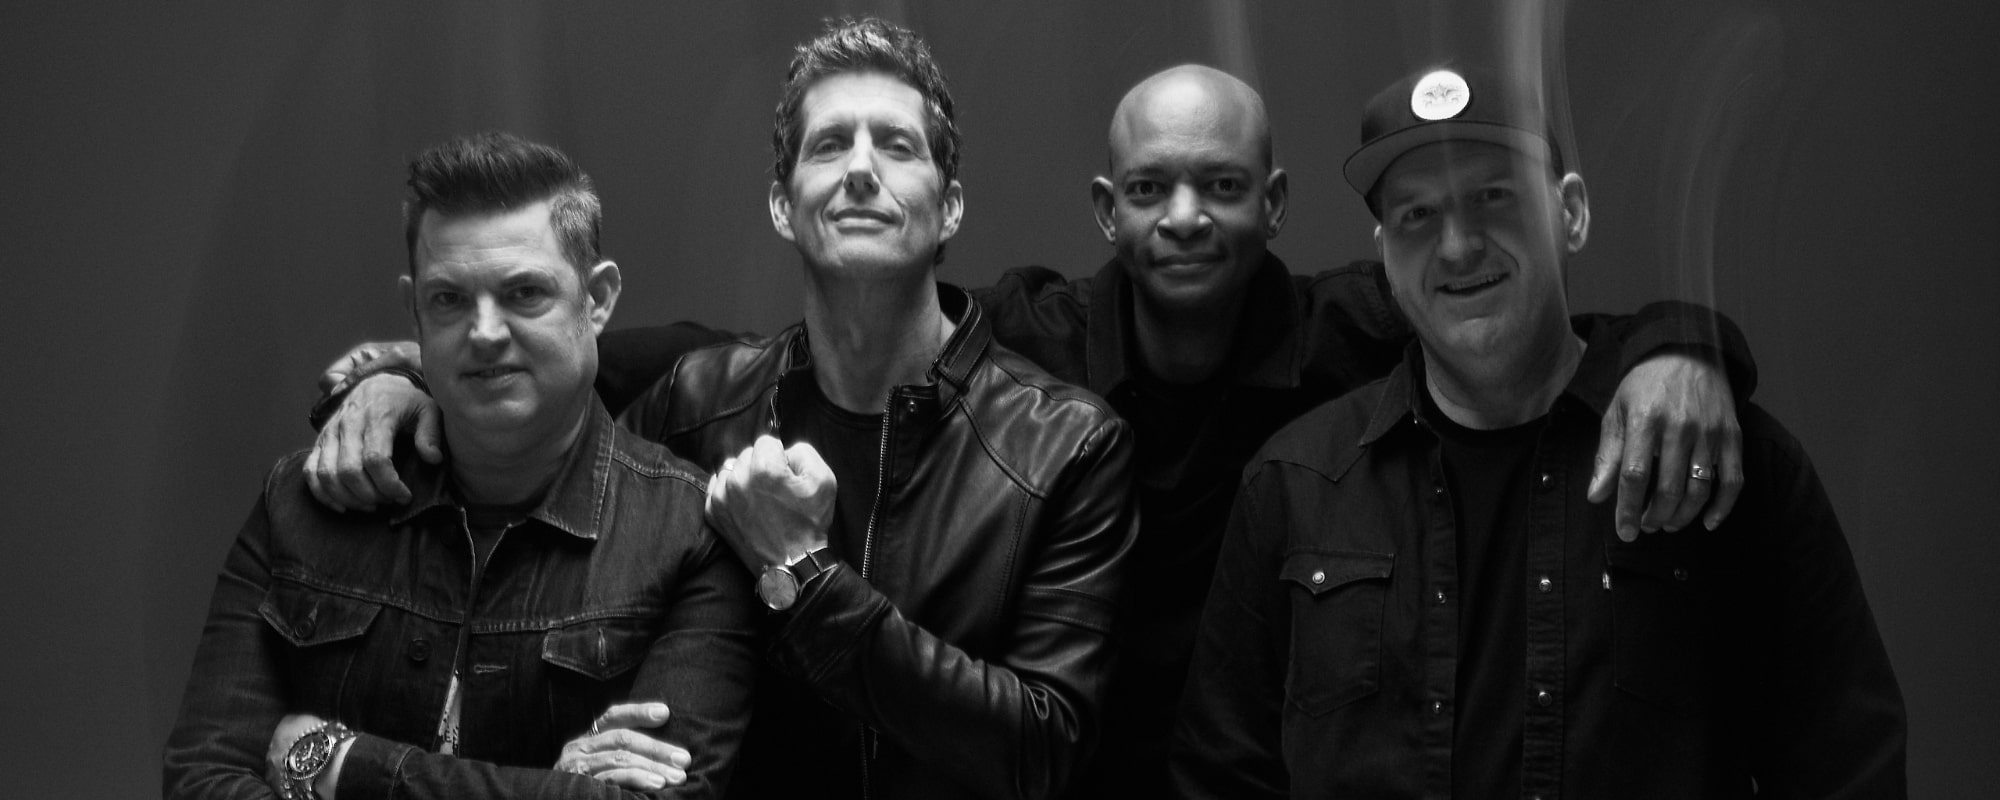 Exclusive: Better Than Ezra Announce Their First Album in a Decade ‘Super Magick’ with Euphoric New Single “Live a Little”